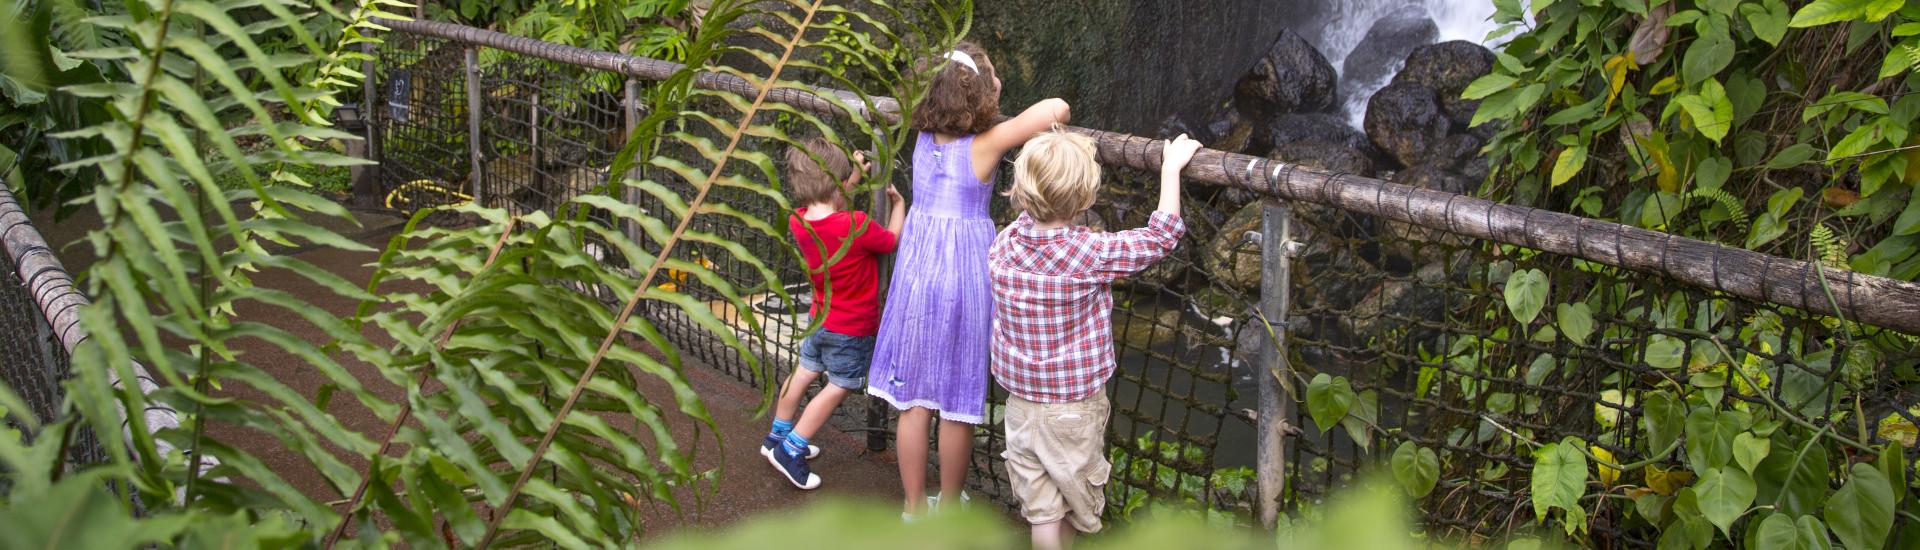 Children looking at a waterfall in Eden's Rainforest Biome